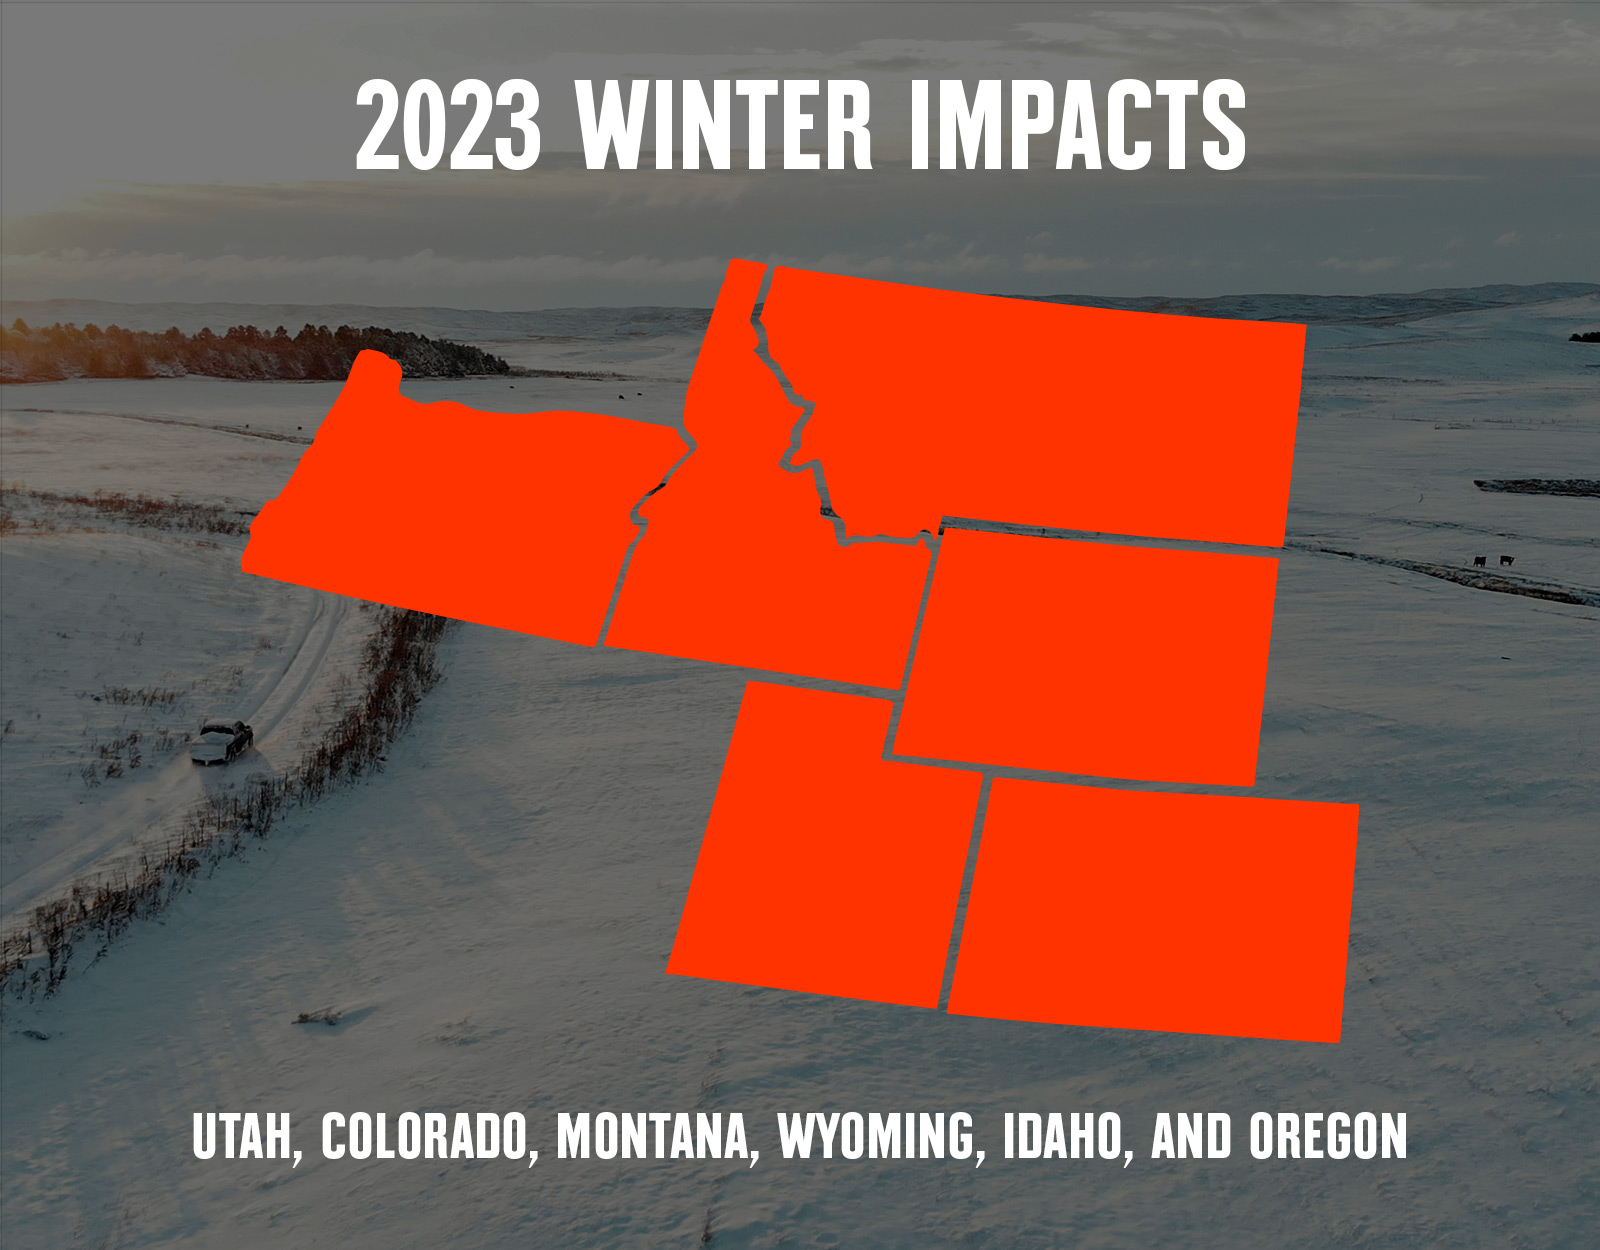 Wildlife Winterkill impacts for UT, CO, WY, MT, OR, and ID